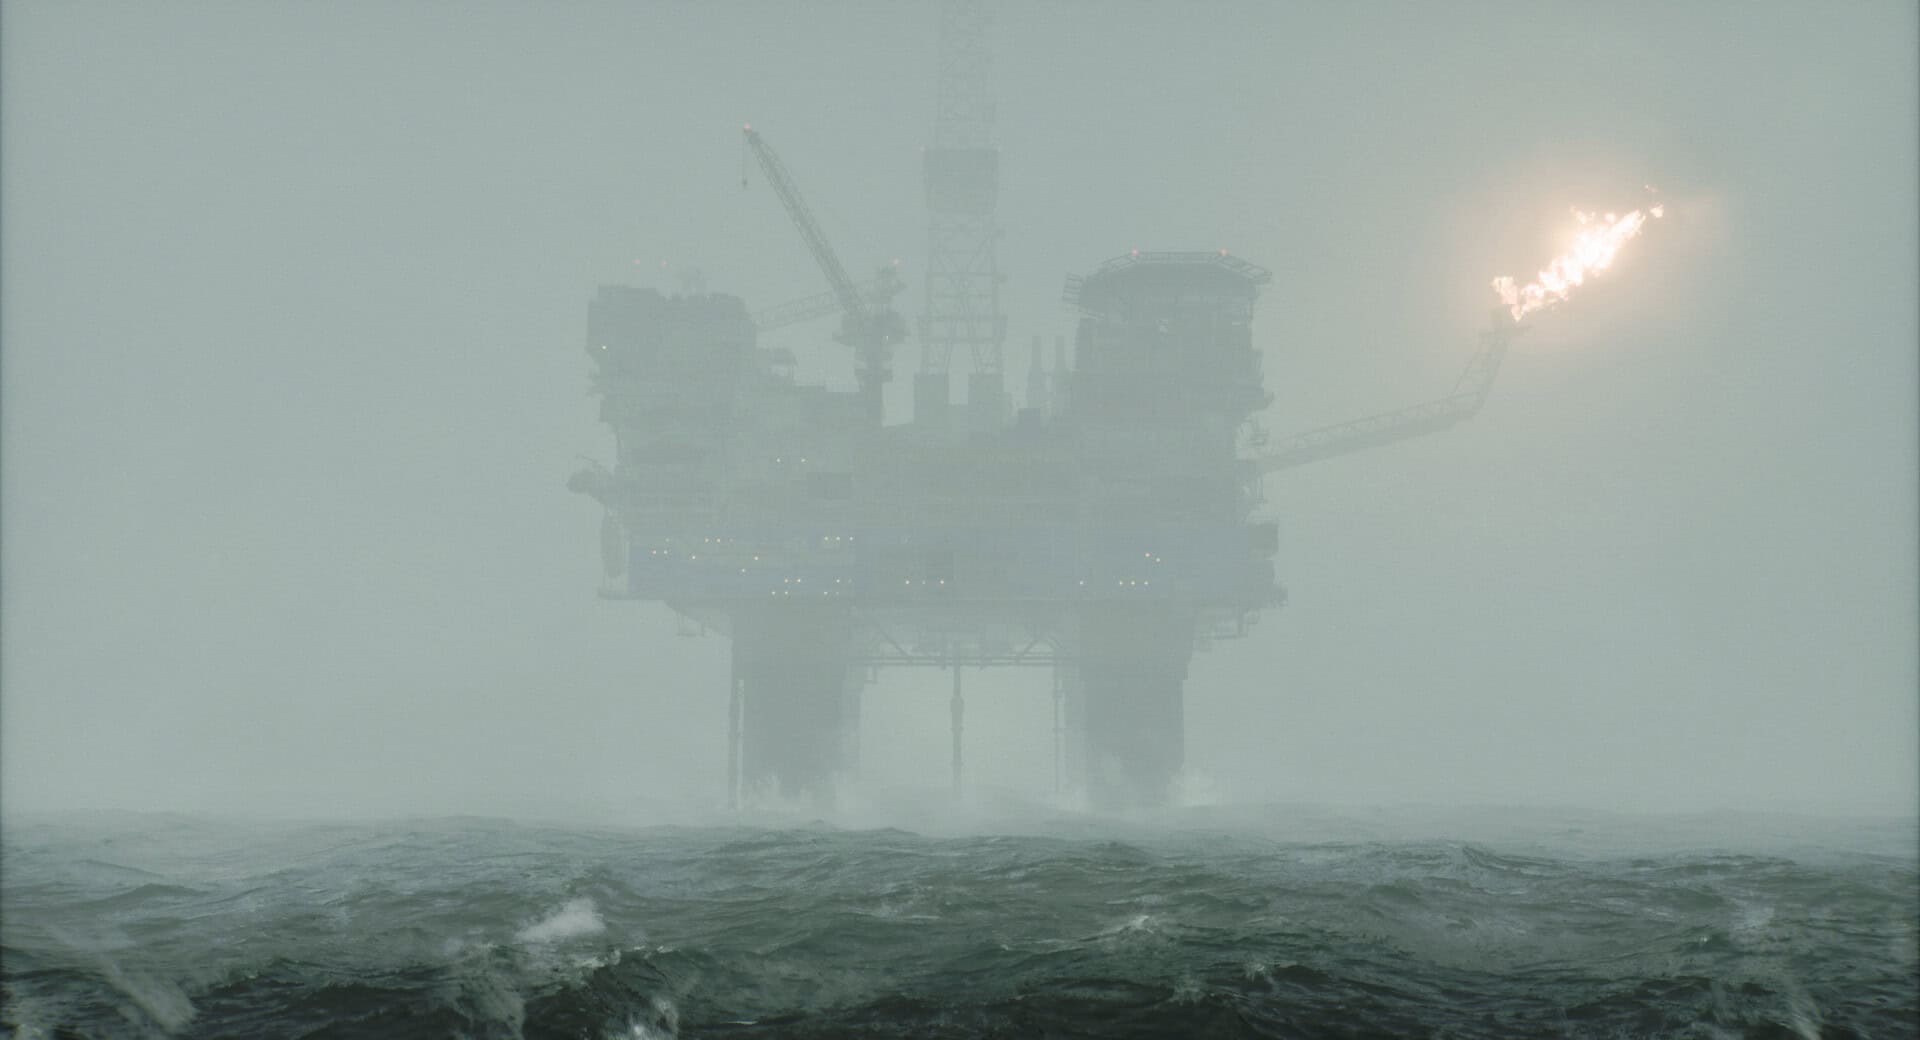 still wakes the deep release date - An offshore oil rig with a flare stack burning